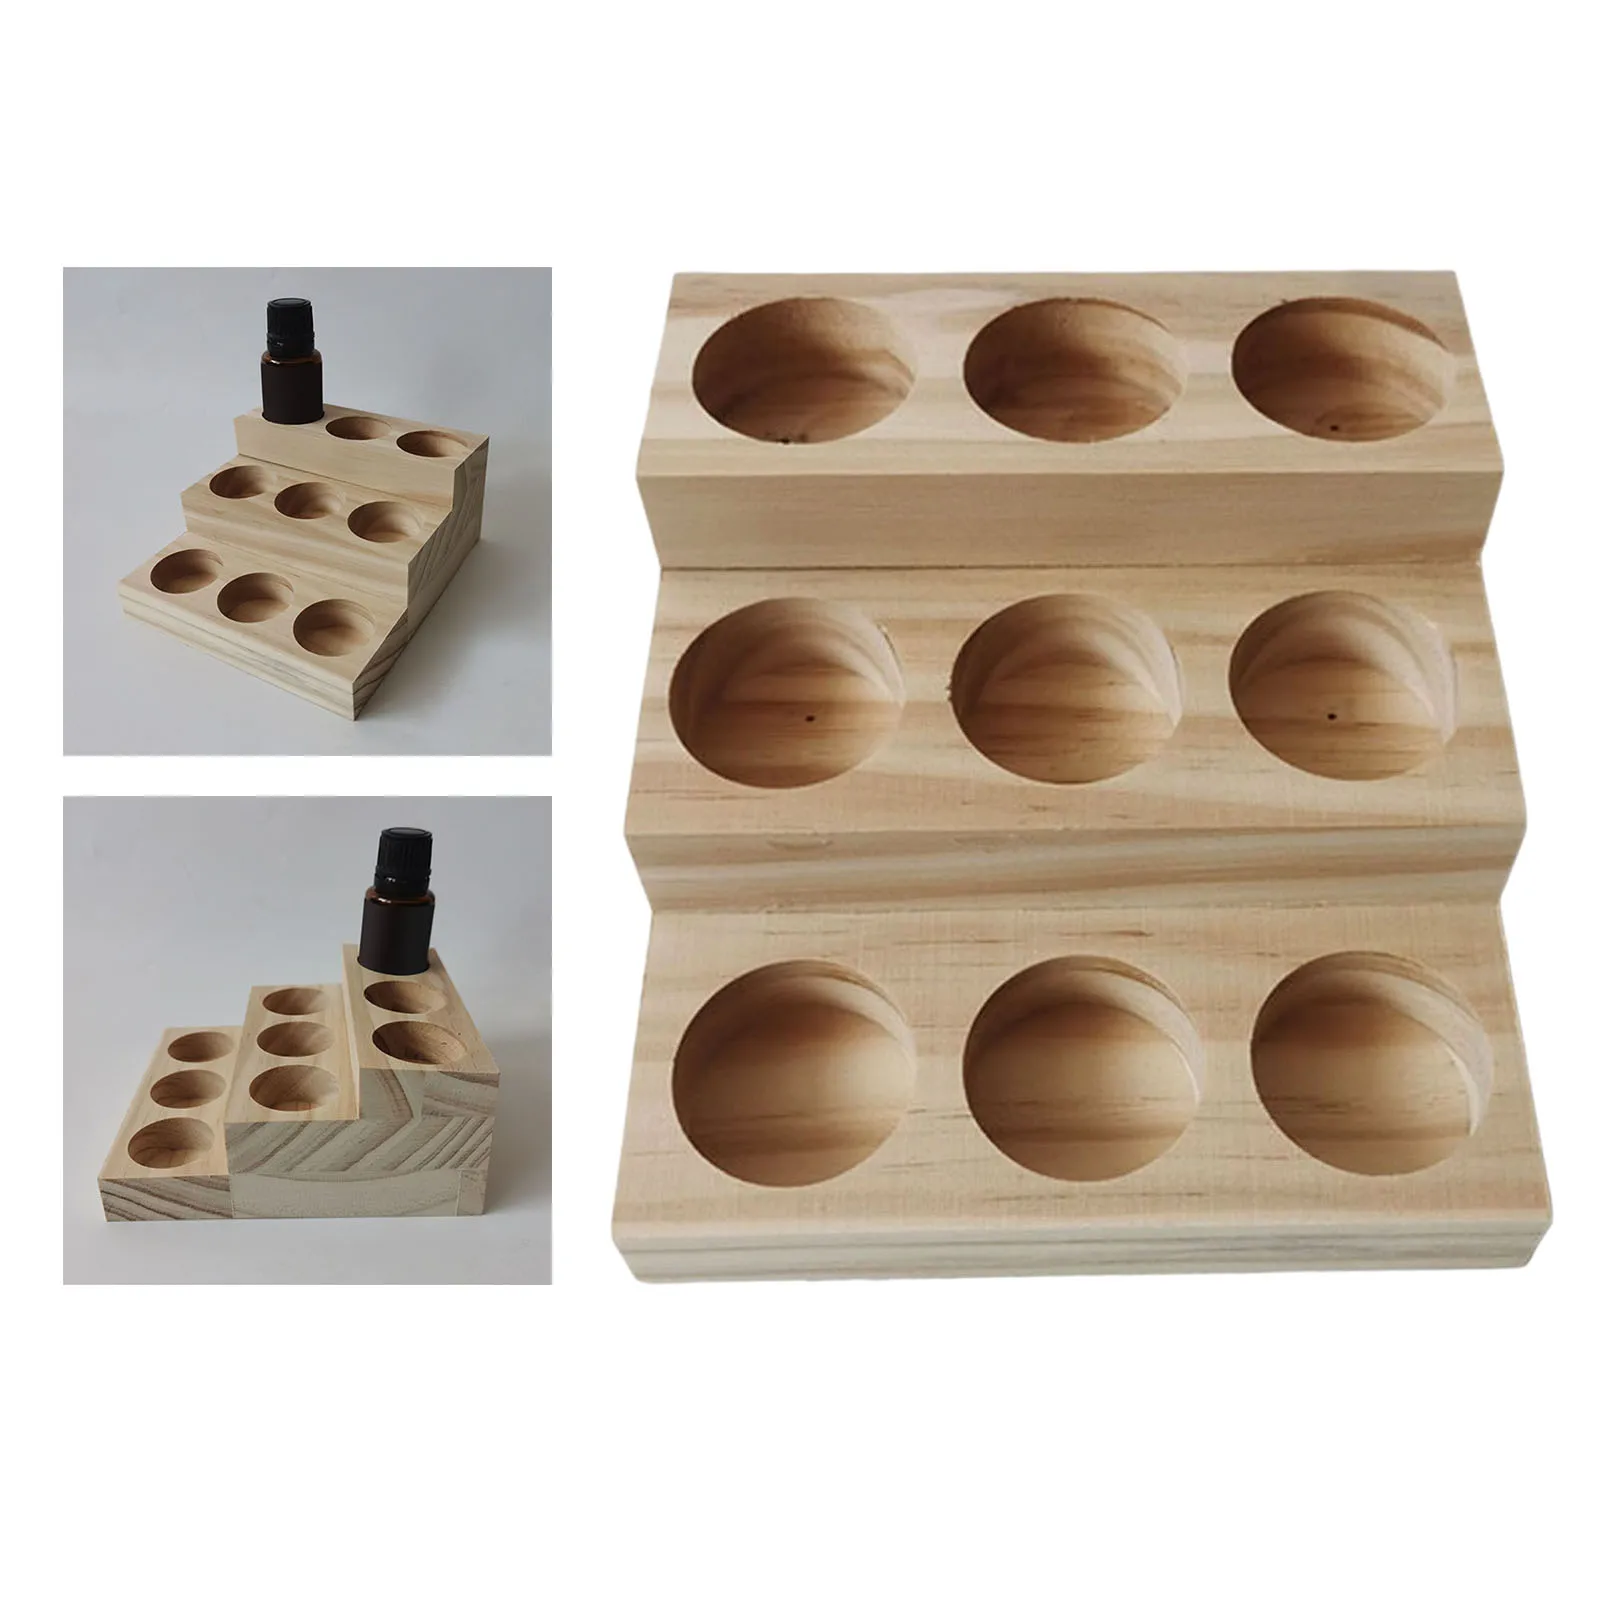 Wooden Essential Oils Display Stand 3 Tiers 9 Slots for Essential Oils, Beauty Products, Diffuser, Nail Polish Bottles